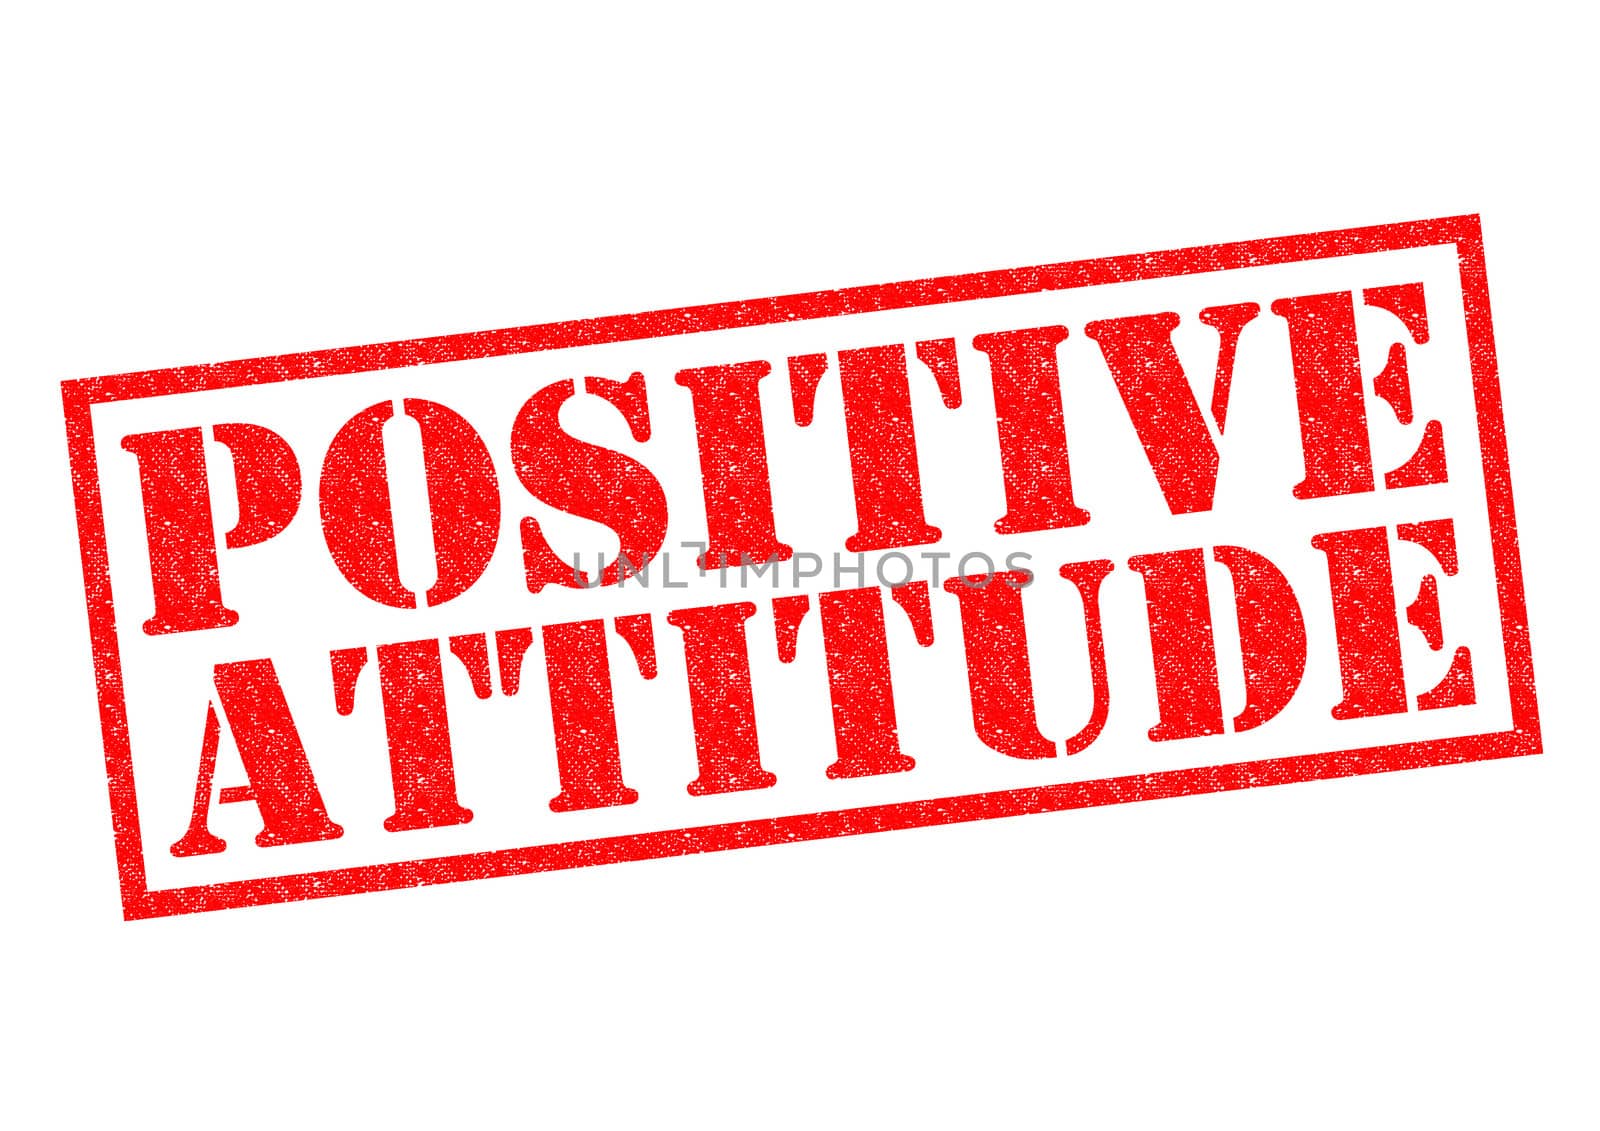 POSITIVE ATTITUDE red Rubber Stamp over a white background.